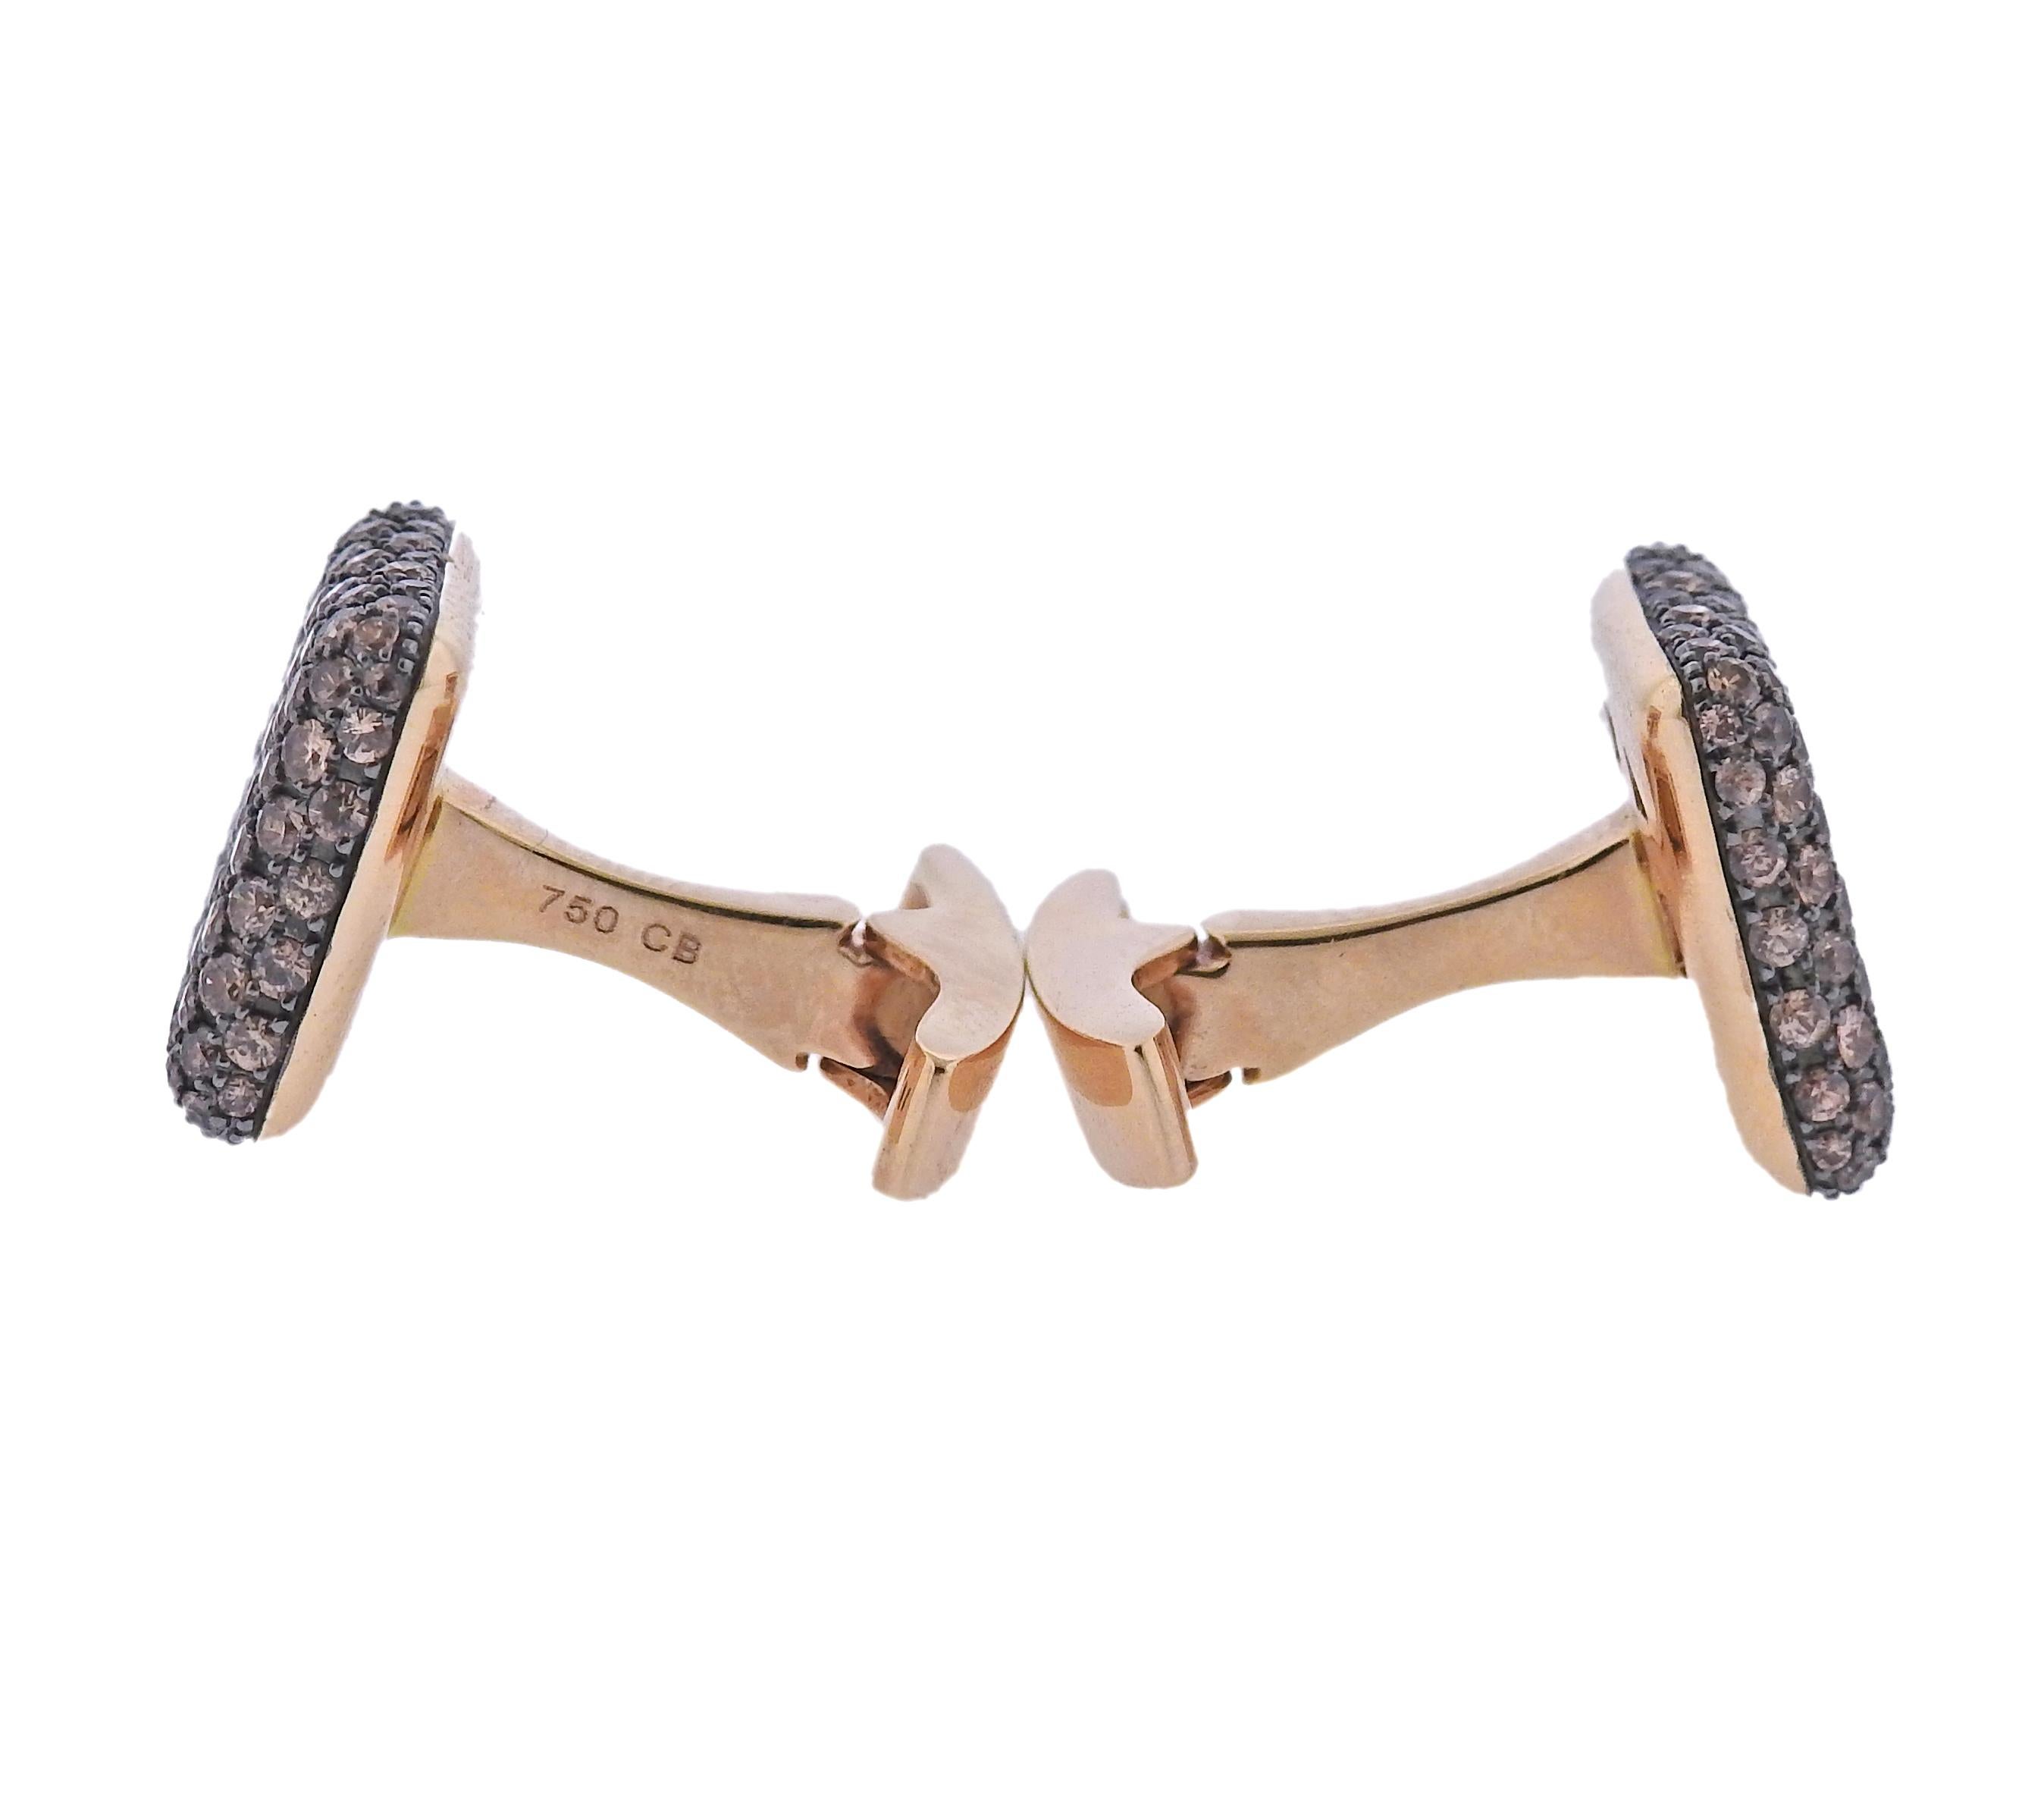 Brand new with tag Bucherer cufflinks, in 18k gold, with 3.19ctw in zircon.  Come with box. Cufflink top is 12.8 x 12.8mm. Weight - 9.3 grams. Marked: CB 750.